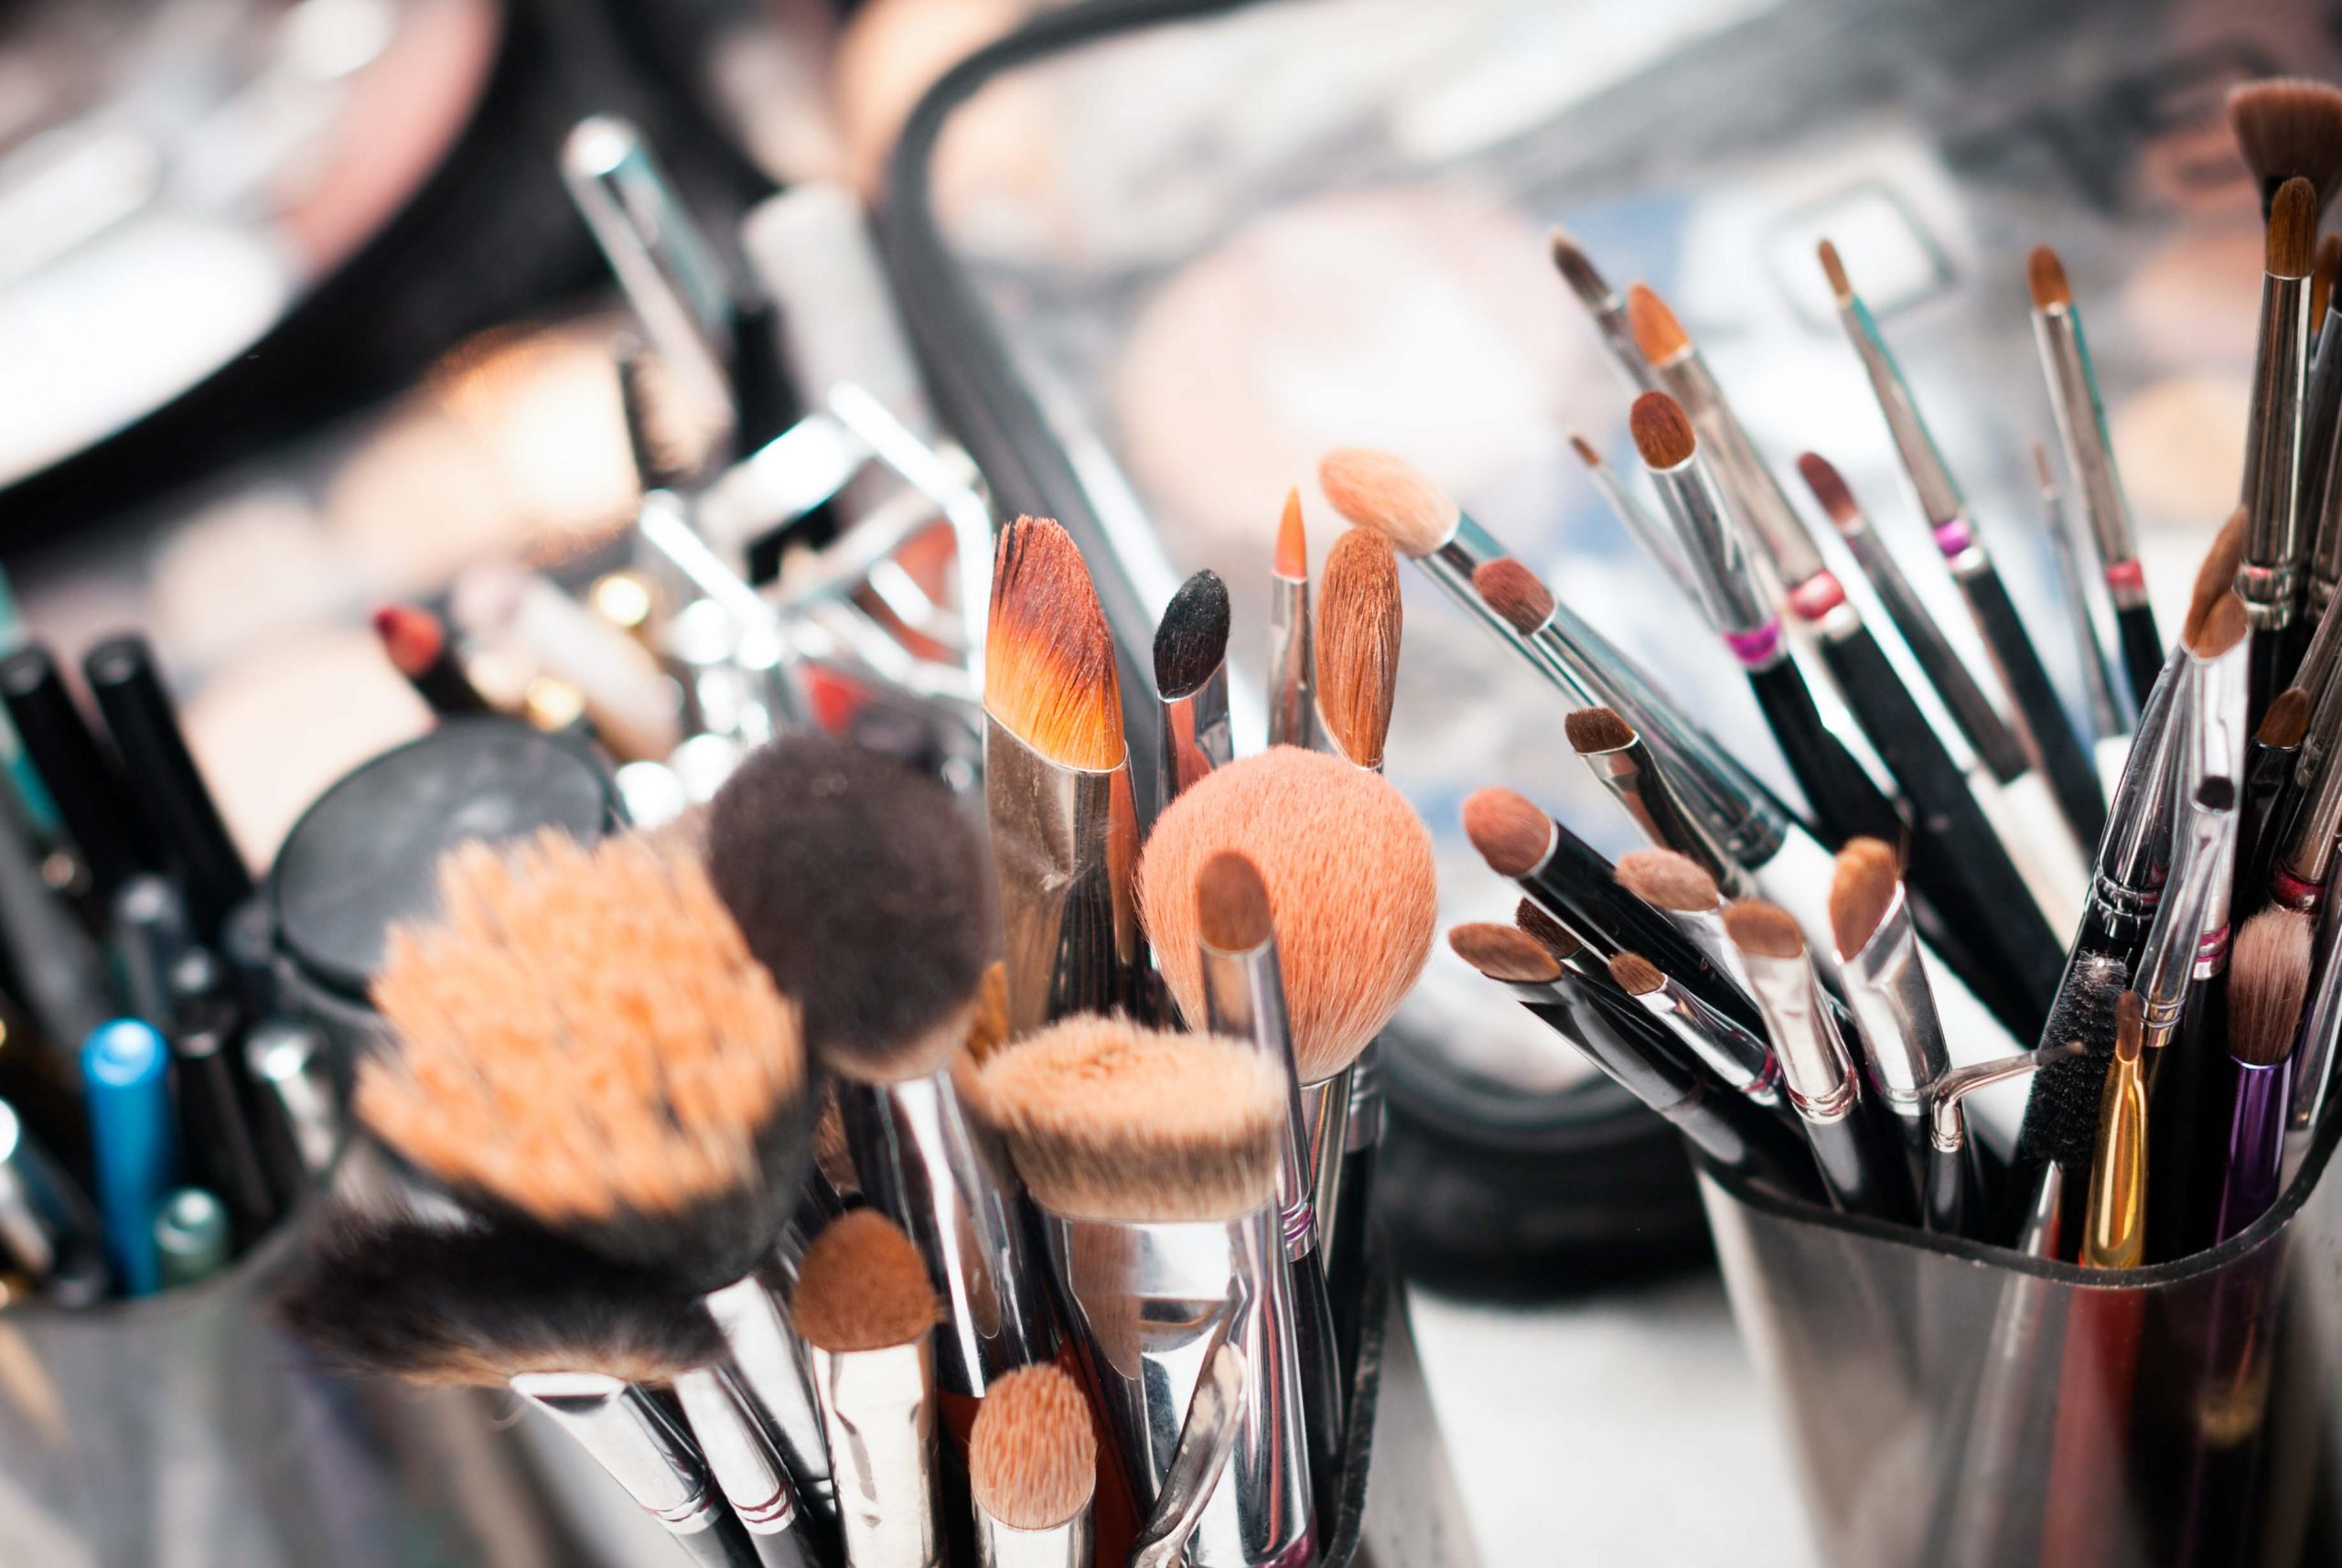 How To Clean Makeup Brushes And Why It’s Necessary